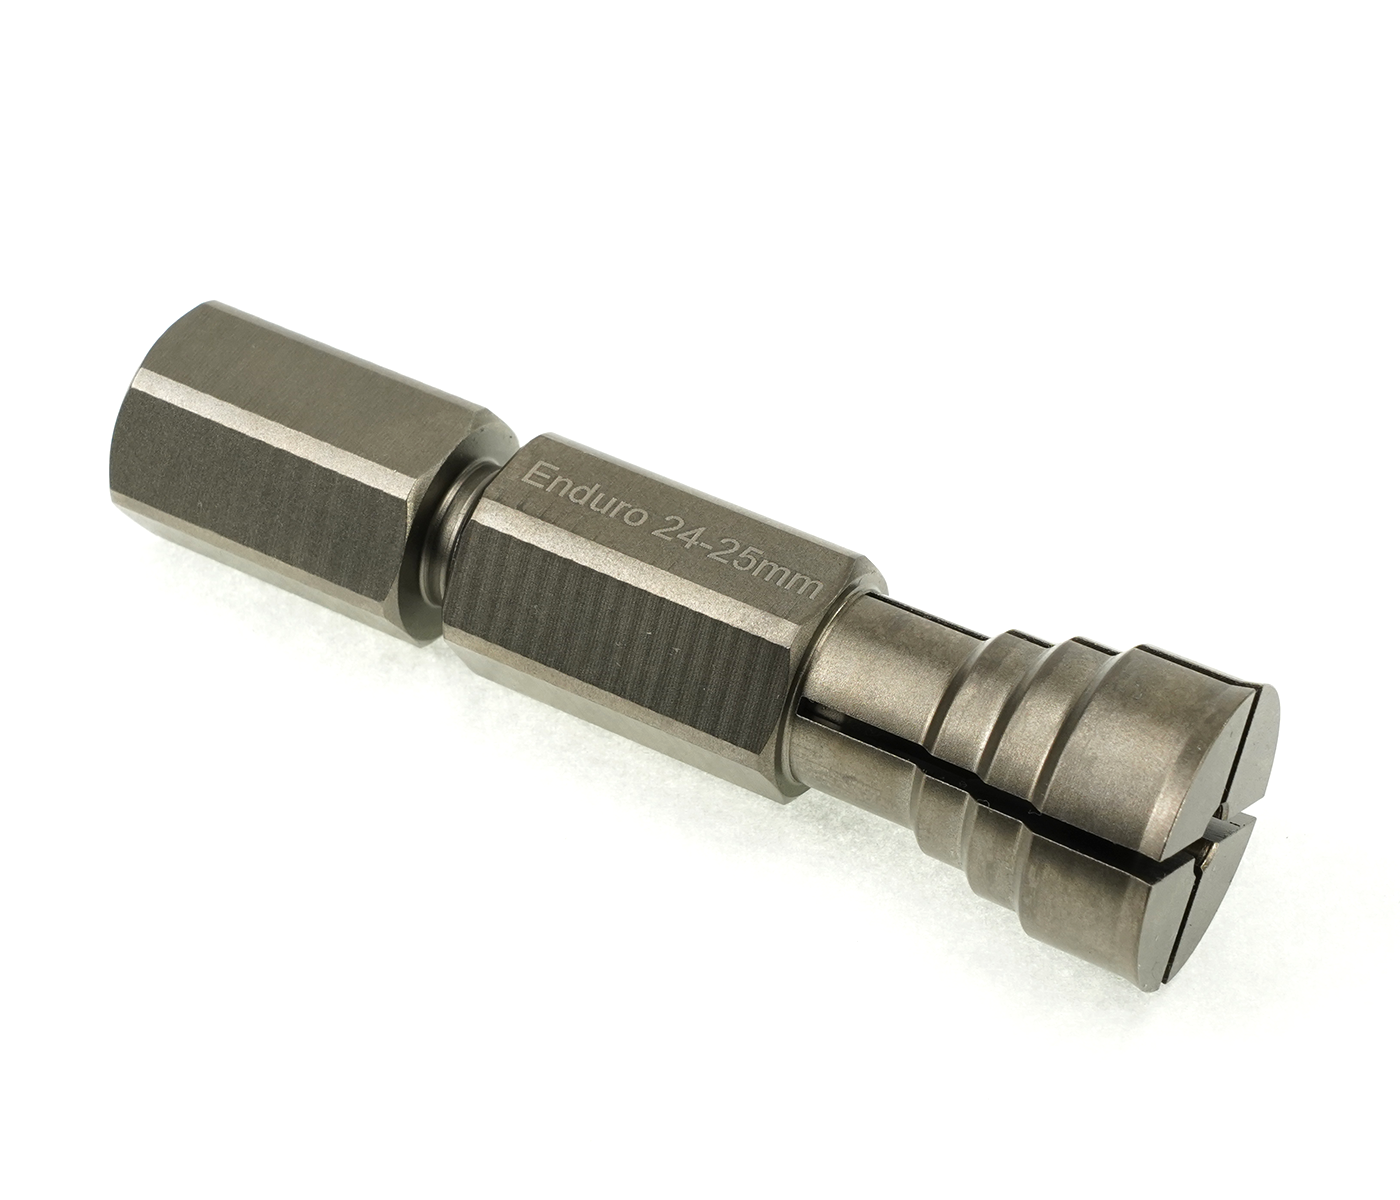 Enduro Puller 24-25 SS - Stainless Steel, Bearing Puller for bearings with 24-25mm IDs